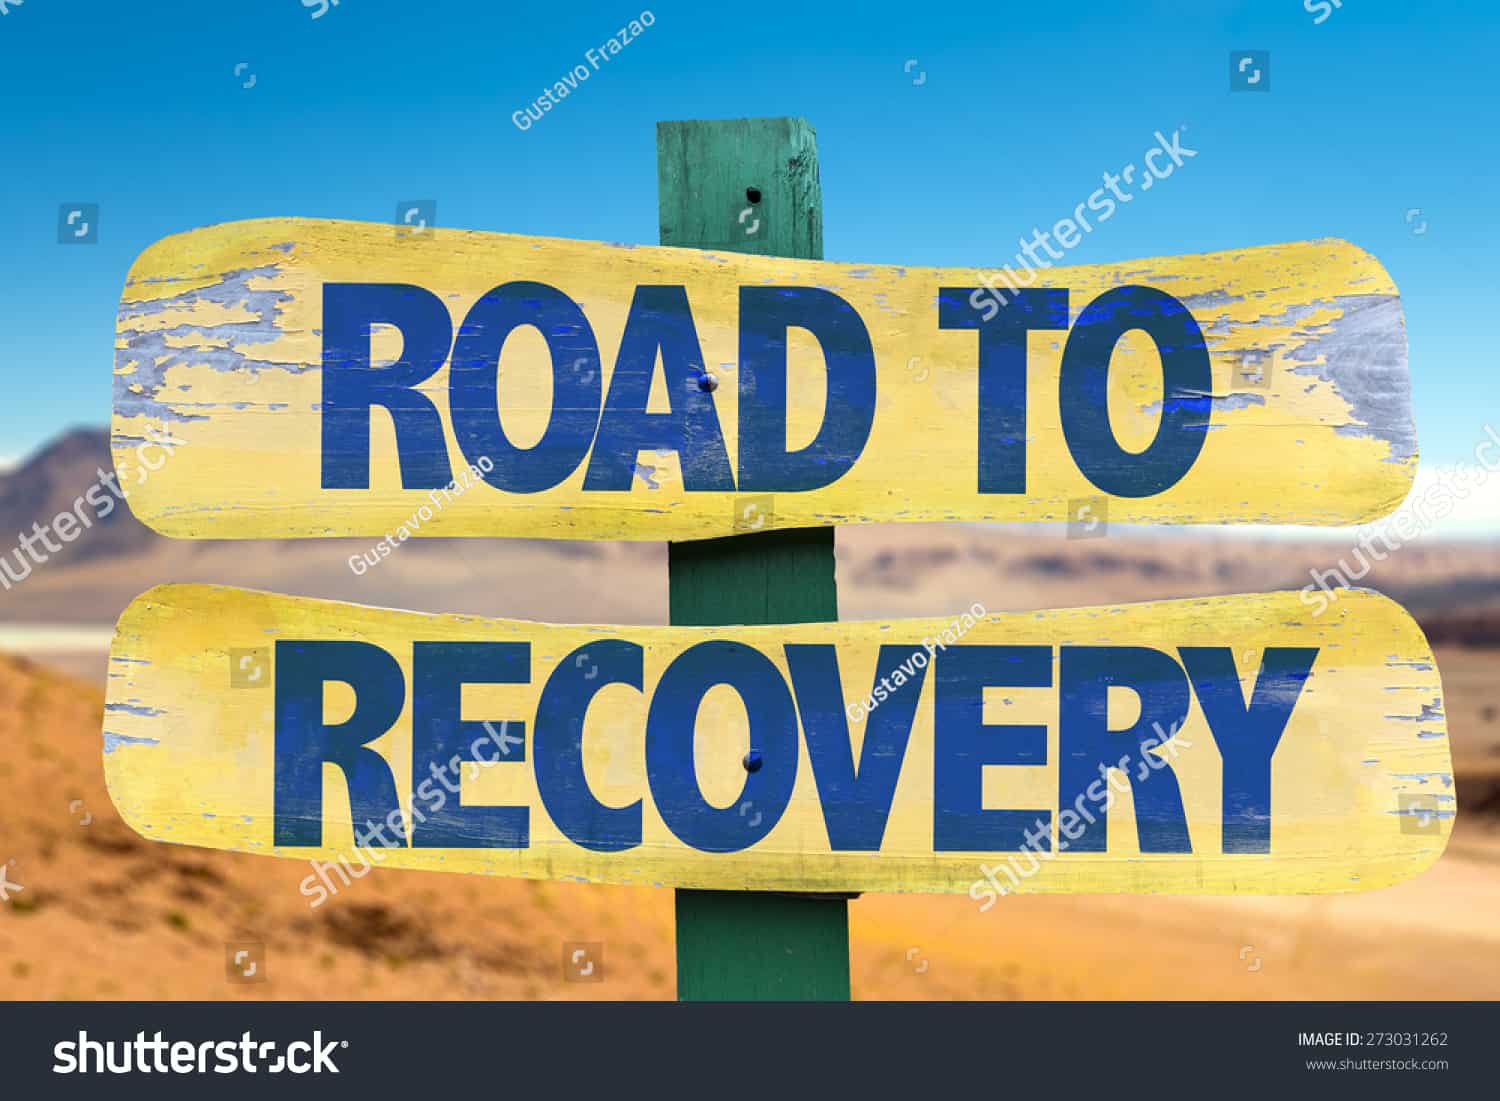 image-road-to-recovery-sign